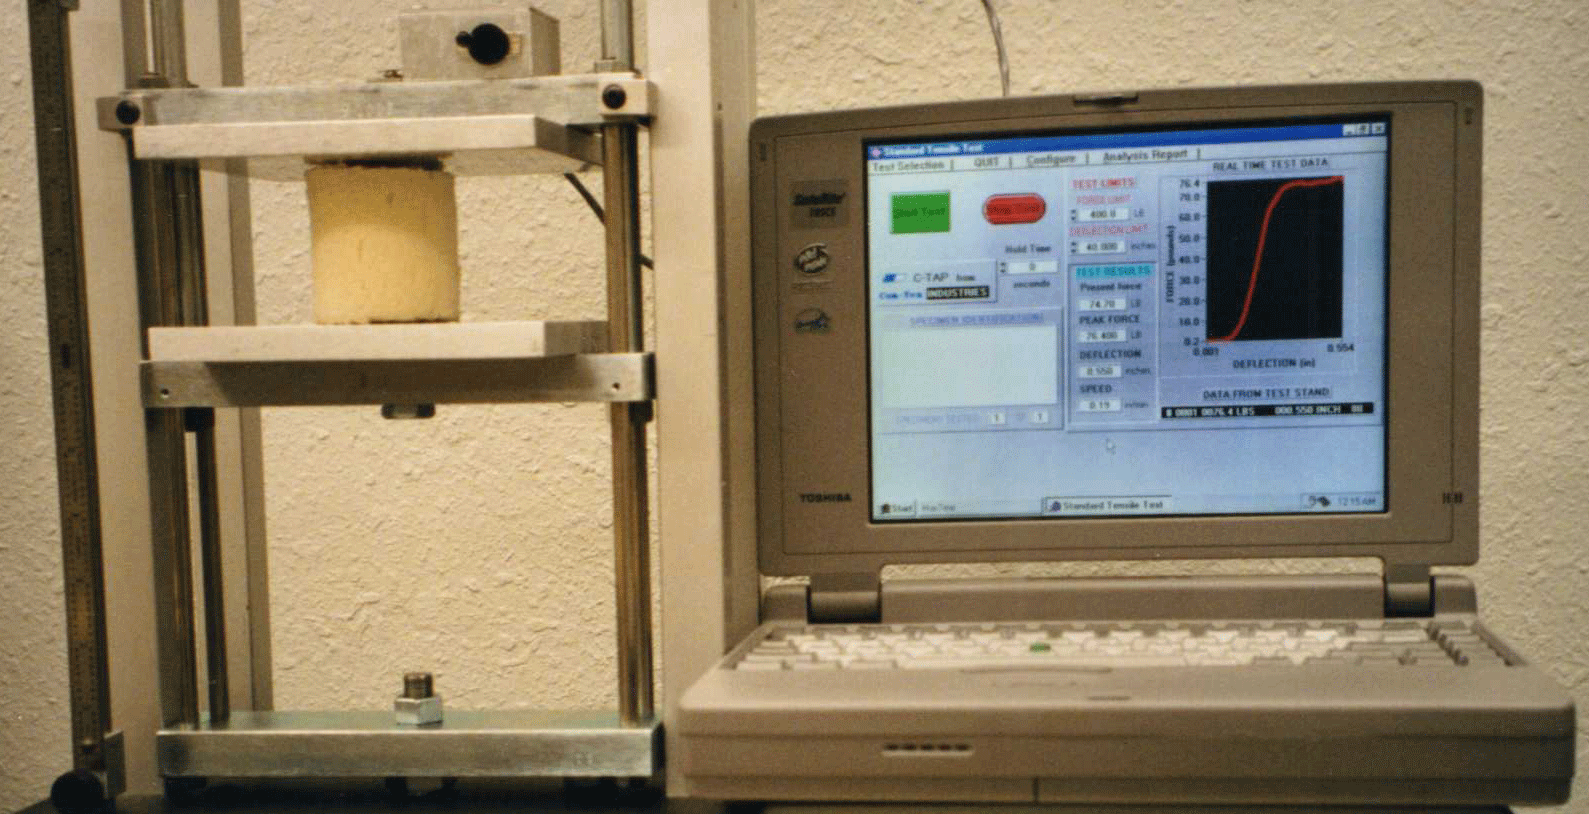 Test equipment with software